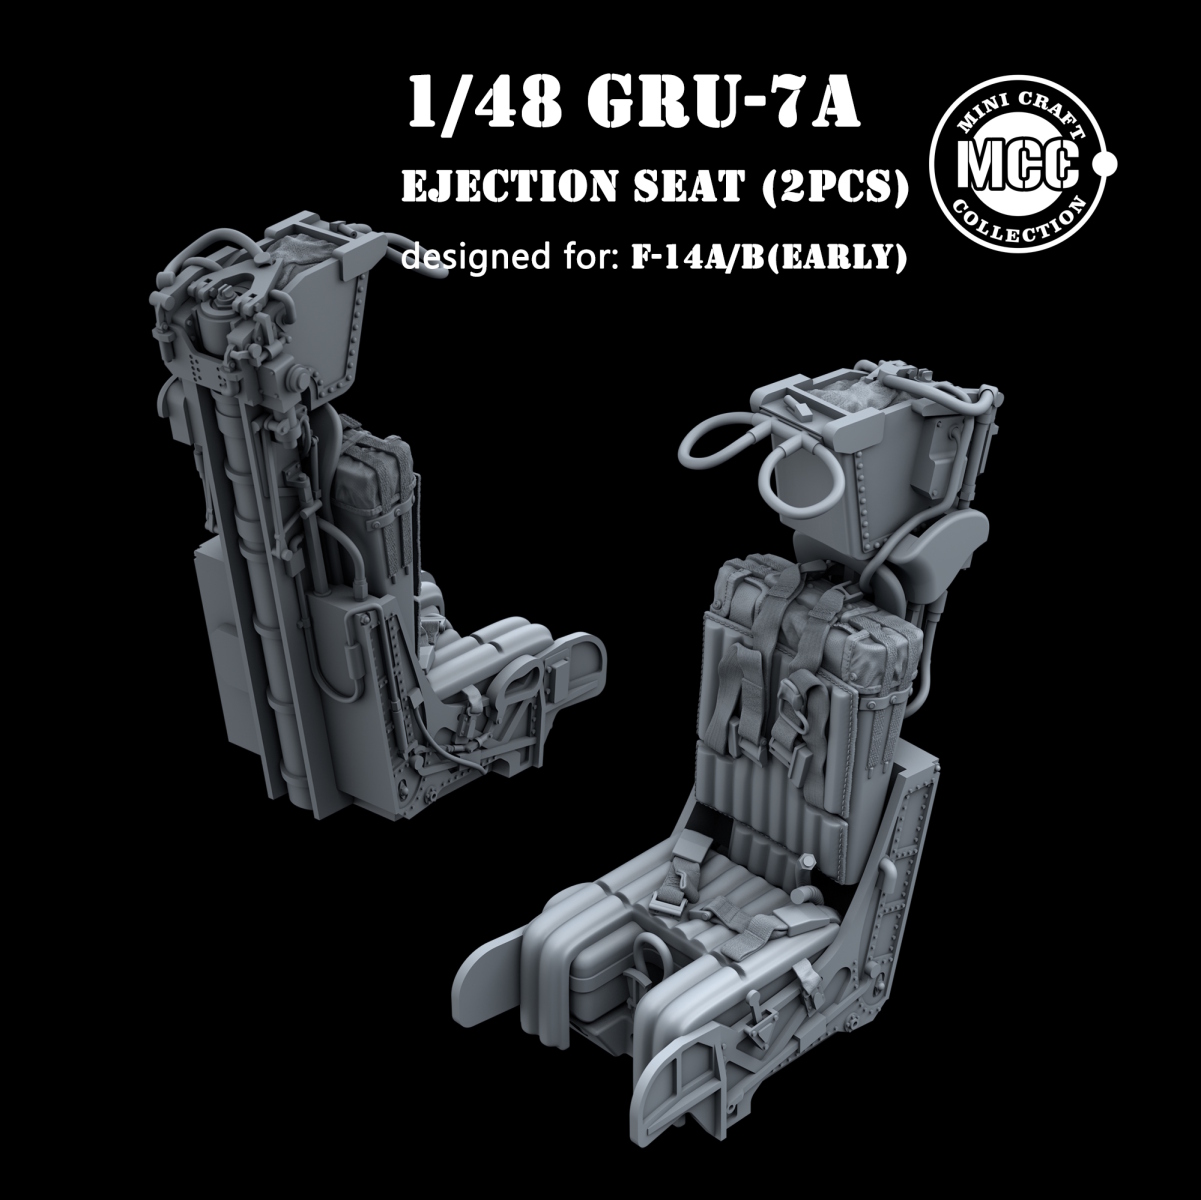 1/48 GRU-7A Ejection Seats for F-14A/B Early (2pcs)